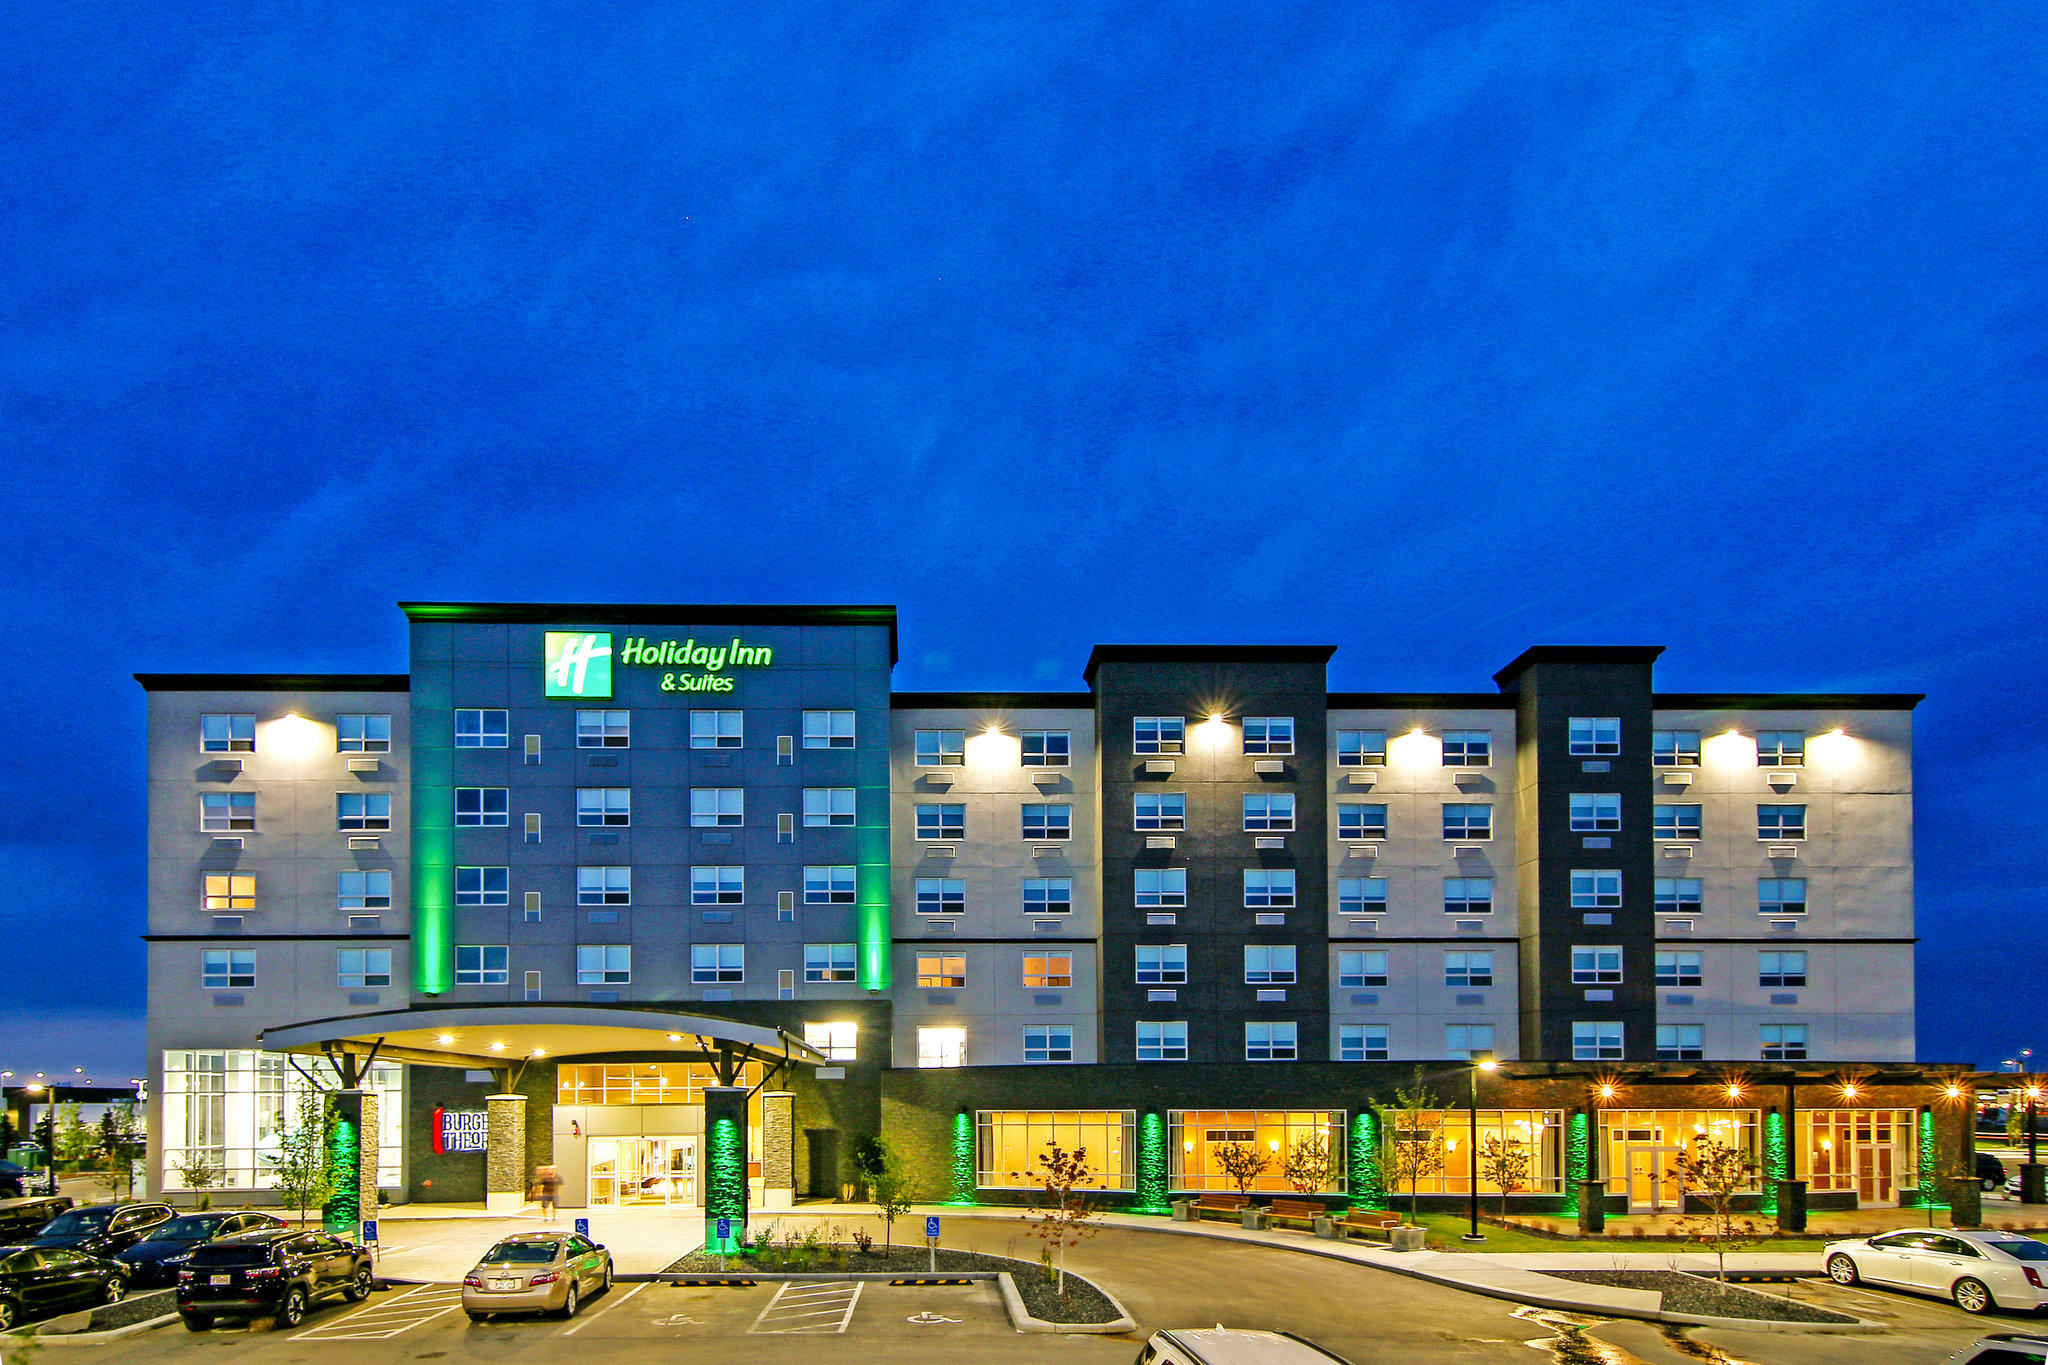 Holiday Inn & Suites Calgary Airport North in Calgary